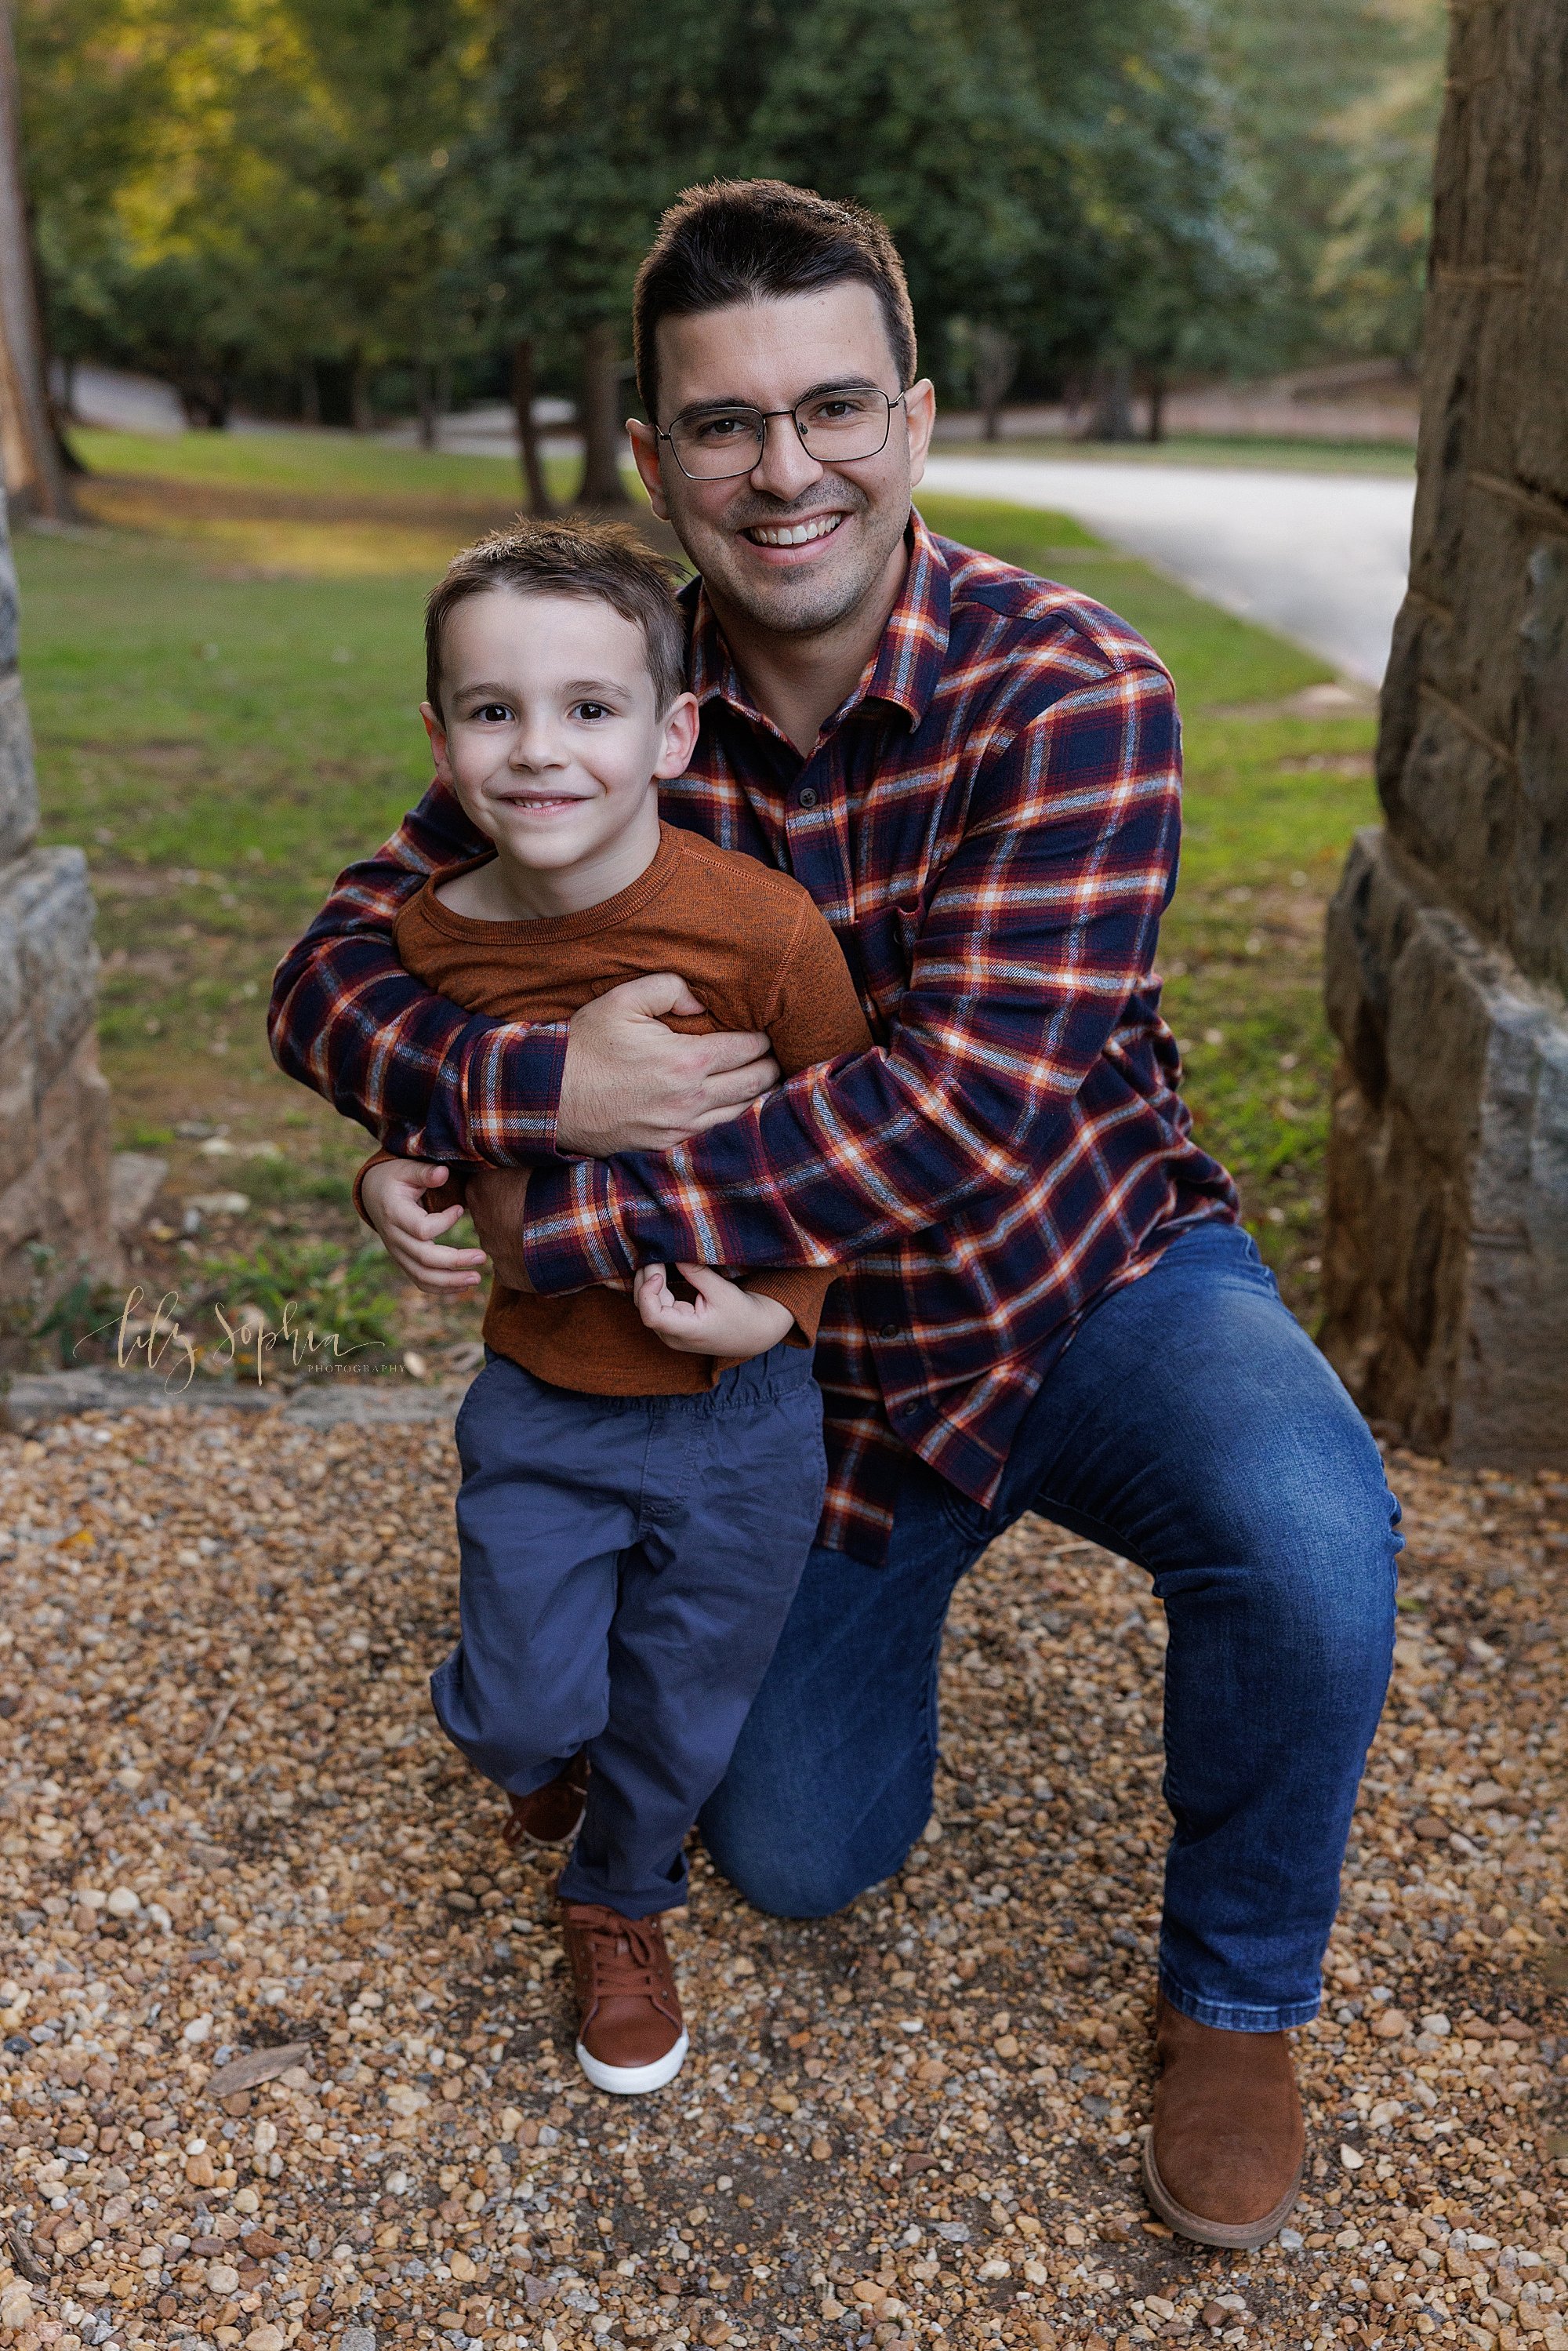 intown-atlanta-decatur-brookhaven-buckhead-outdoor-fall-pictures-family-photoshoot_5545.jpg